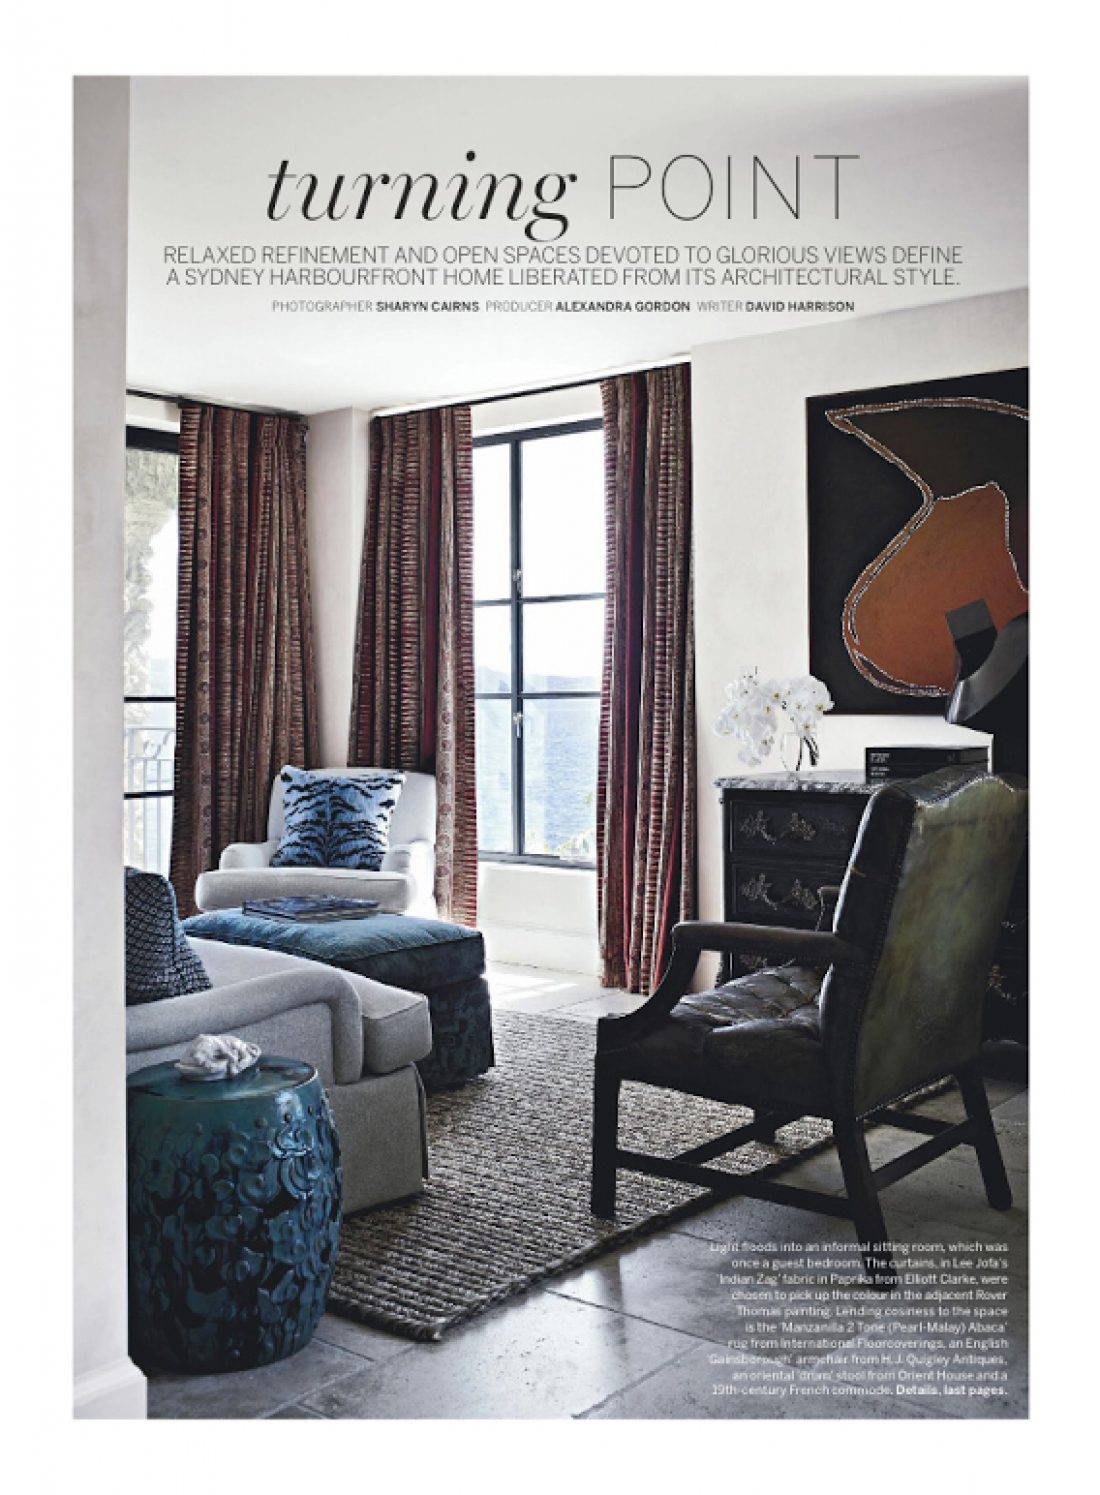 Vogue Living - Point Piper